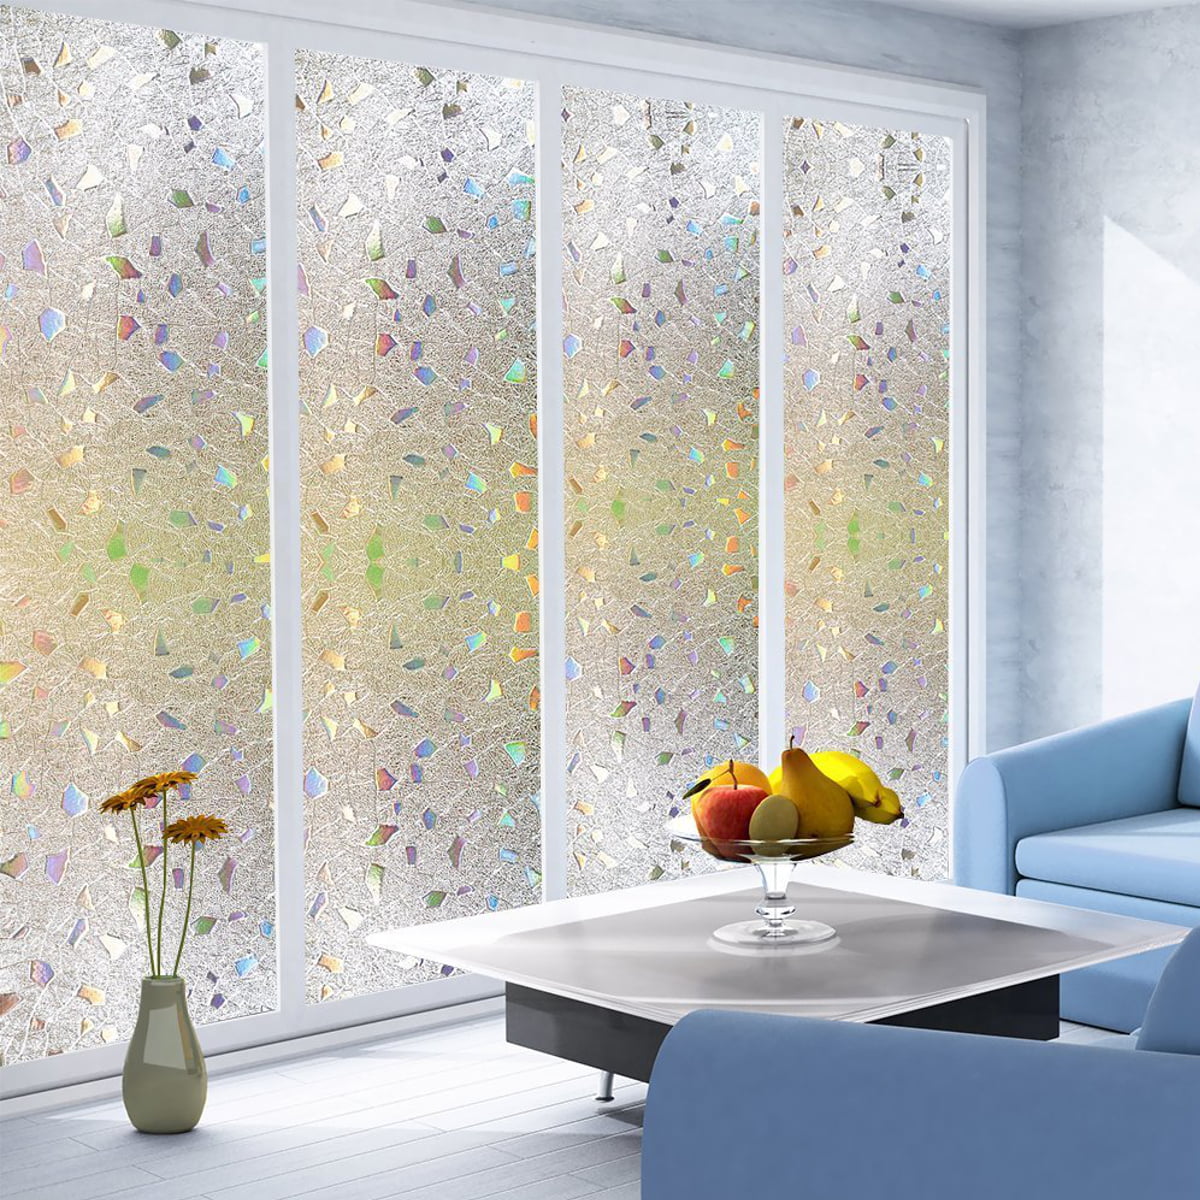 3D DIY Static Cling Cover Frosted Window Glass Film Sticker Privacy Home Decor 